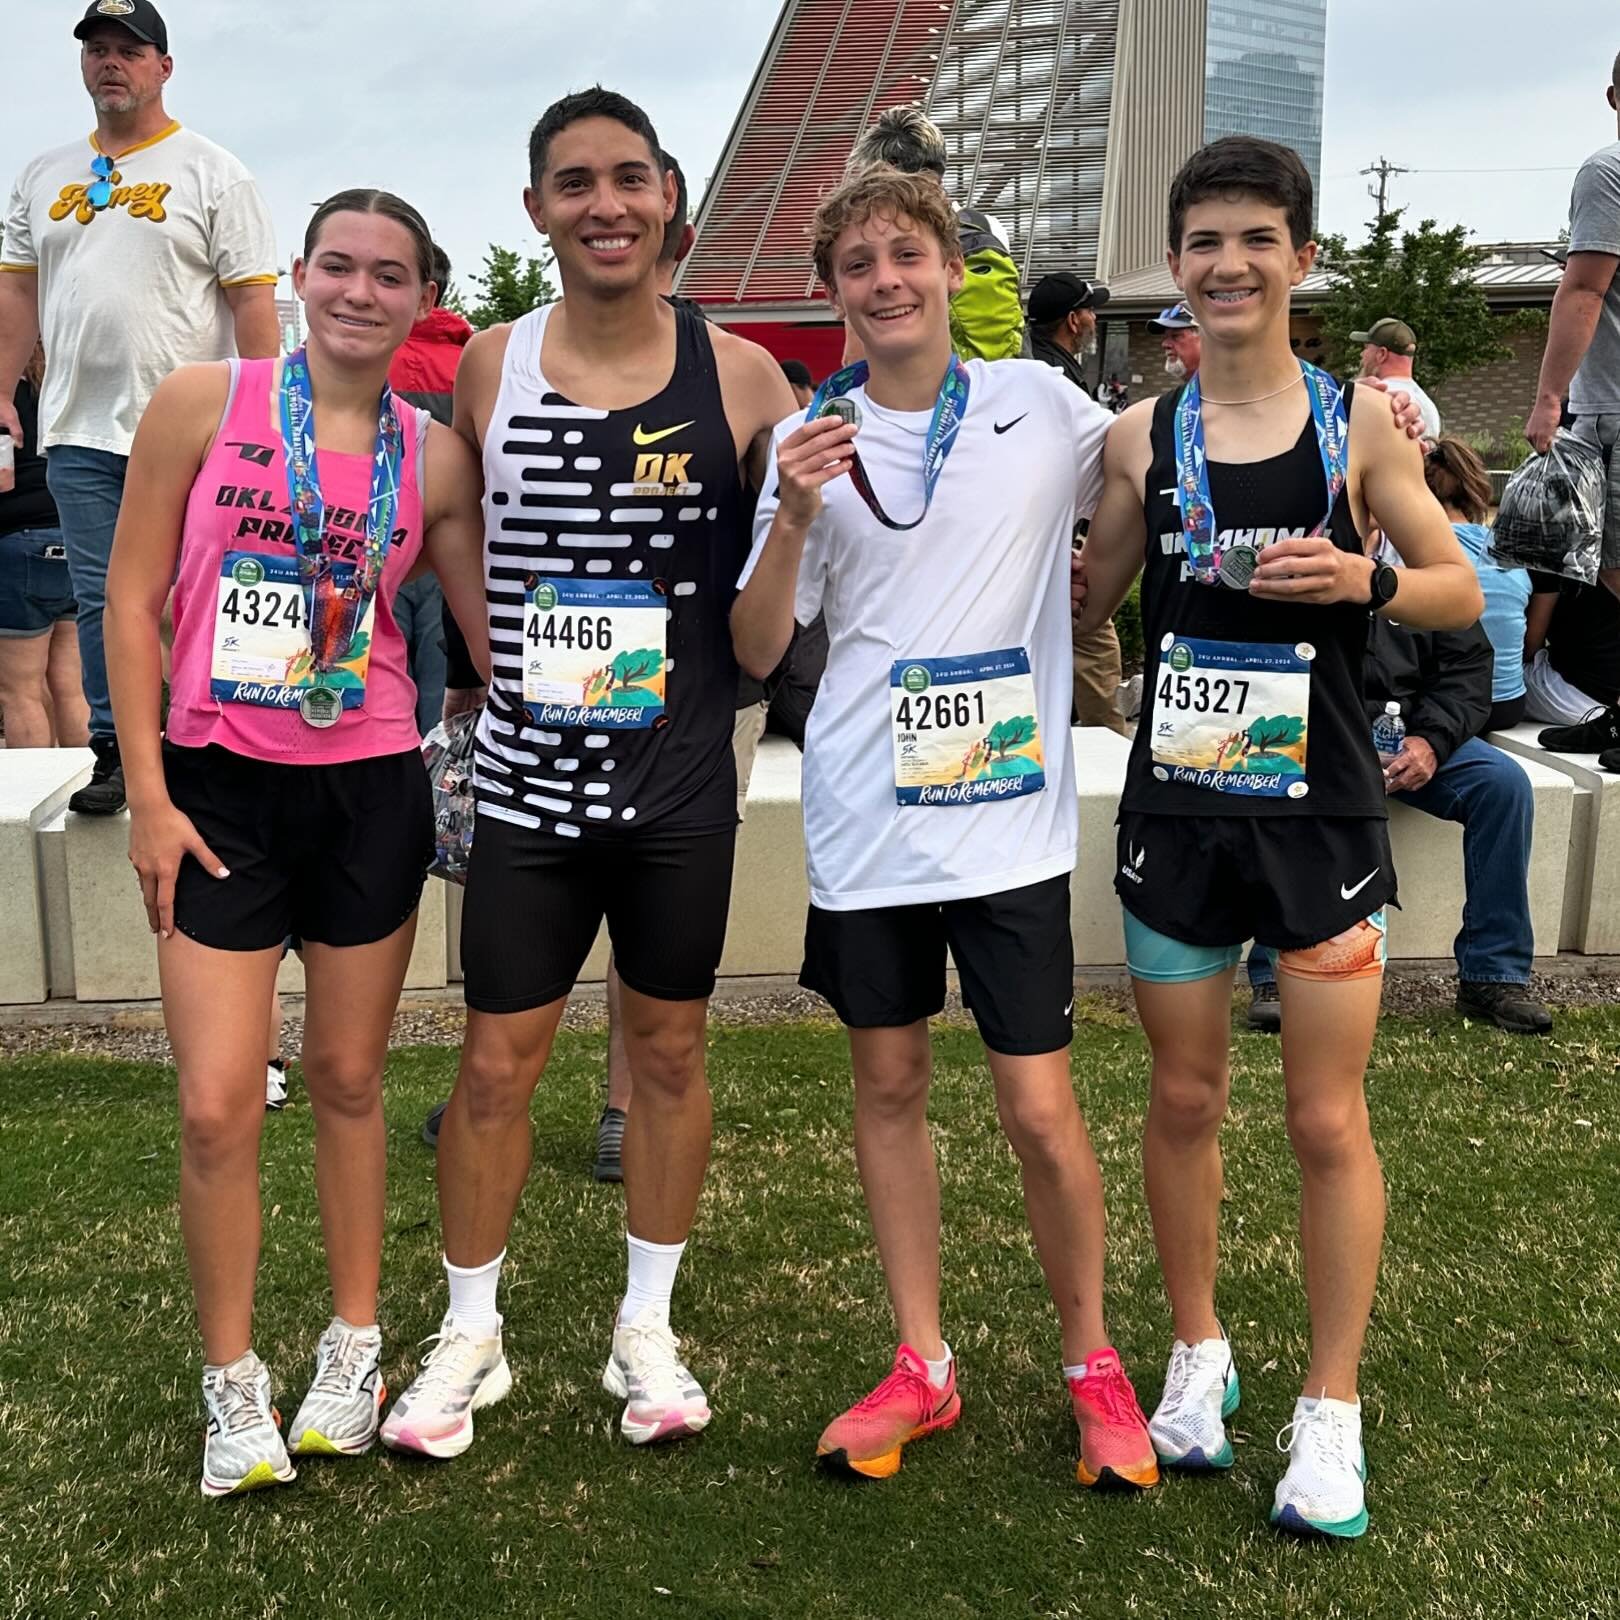 Oklahoma Project represented this morning in OKC Memorial 5k 
- John Singletary finished in  5th overall(17:10) ⚡️
- Chase Brown finished in (18:25) ⚡️
- Emma Britton 3rd female overall (21:00)⚡️
- Coach Chavez finished 2nd overall (16:38) ⚡️
#runtor